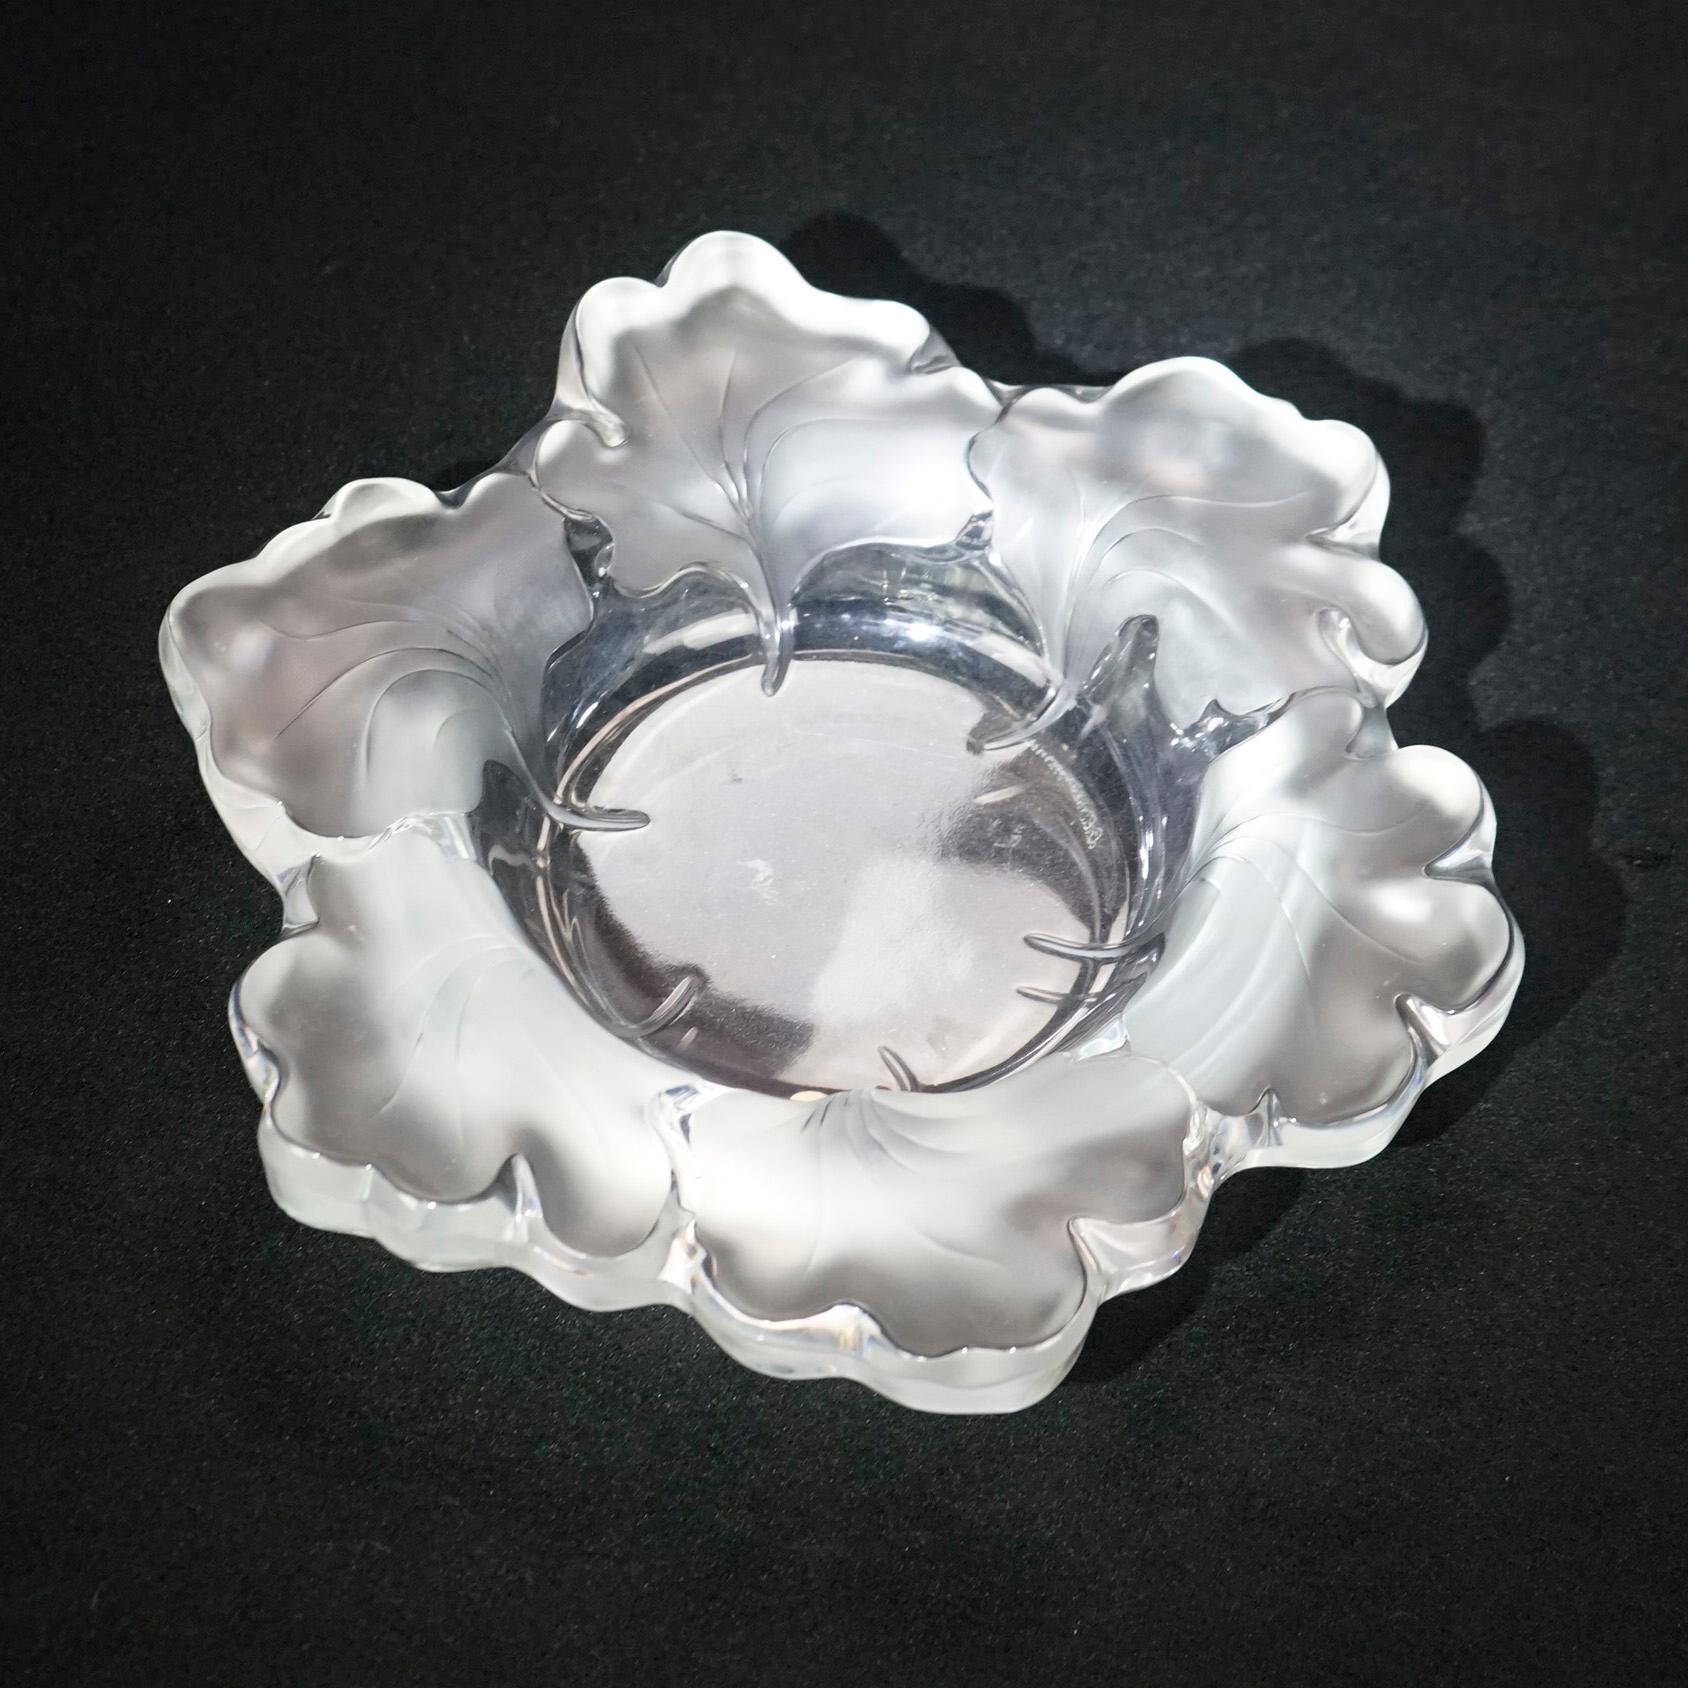 French Lalique Art Glass Leaf Form Center Bowl 20th C 1